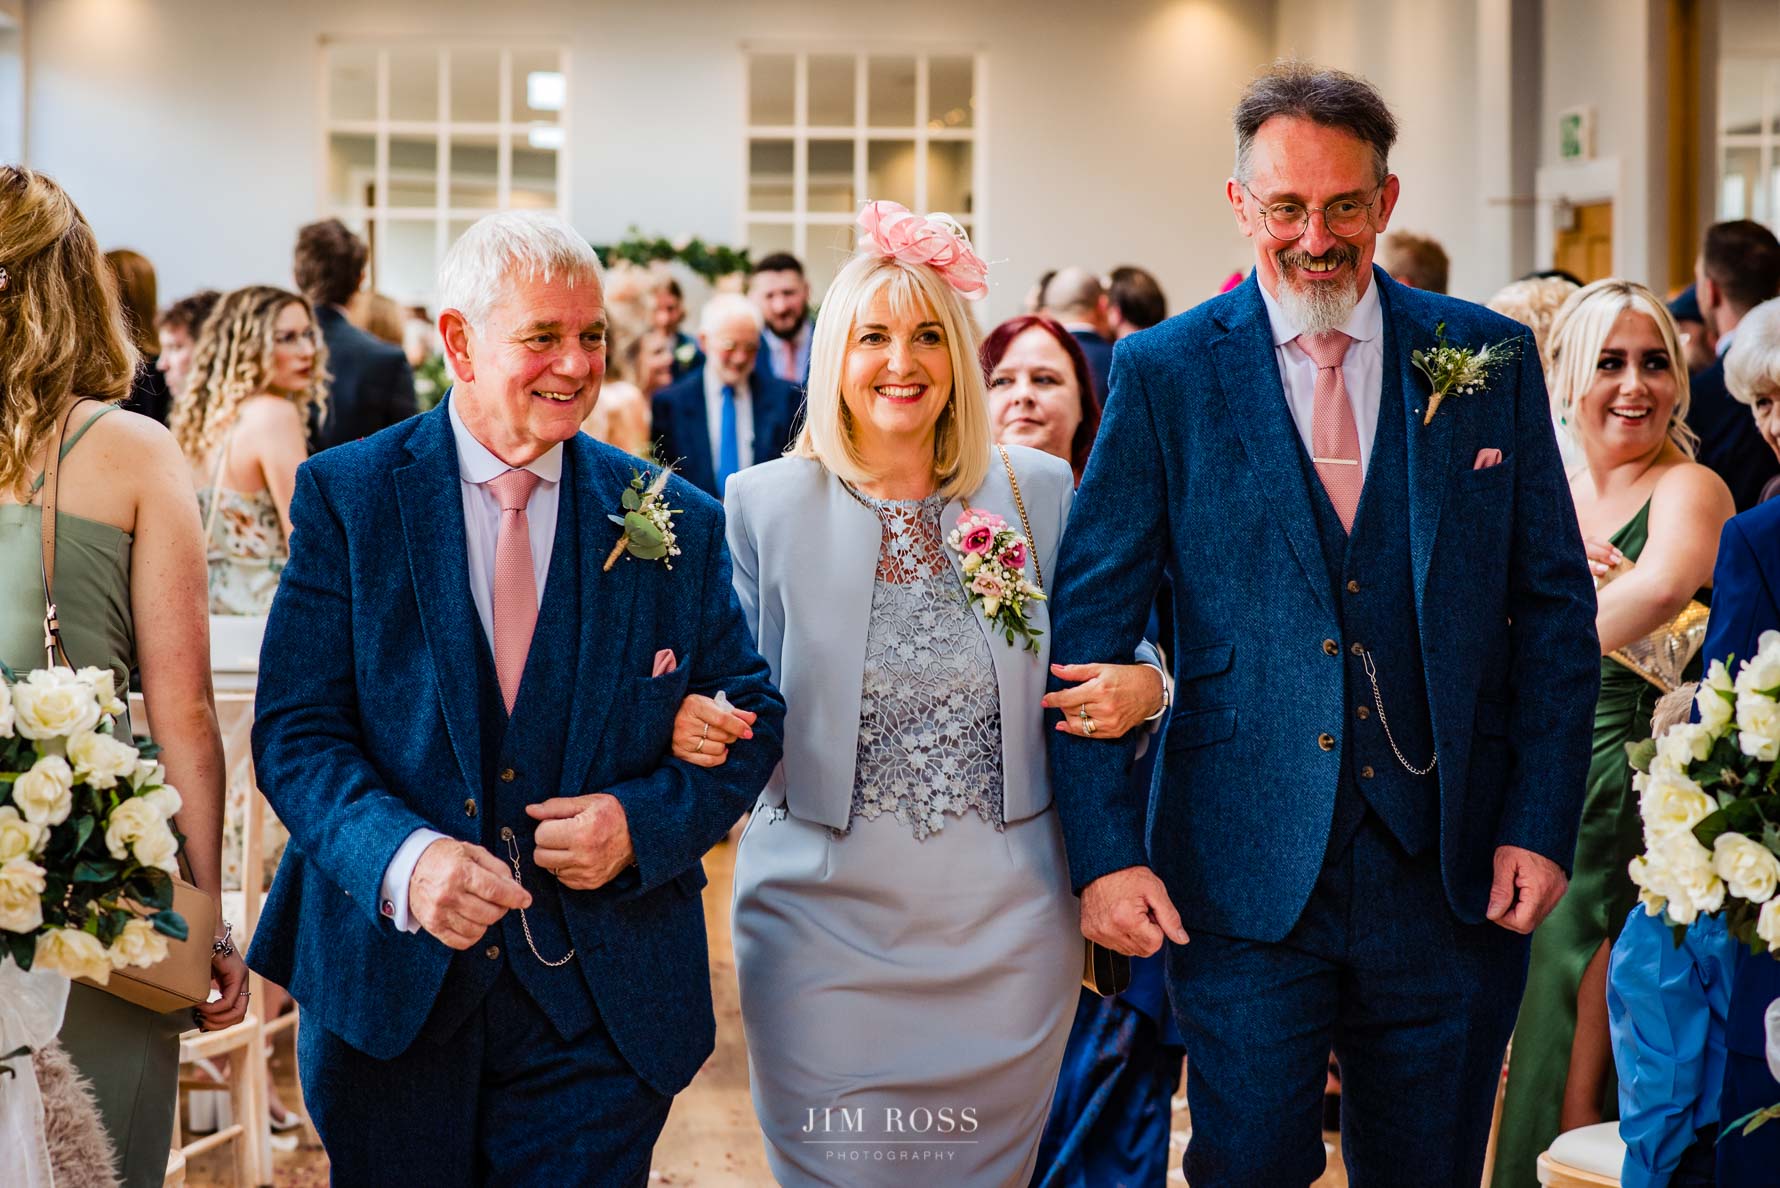 lucky lady takes two men down the aisle